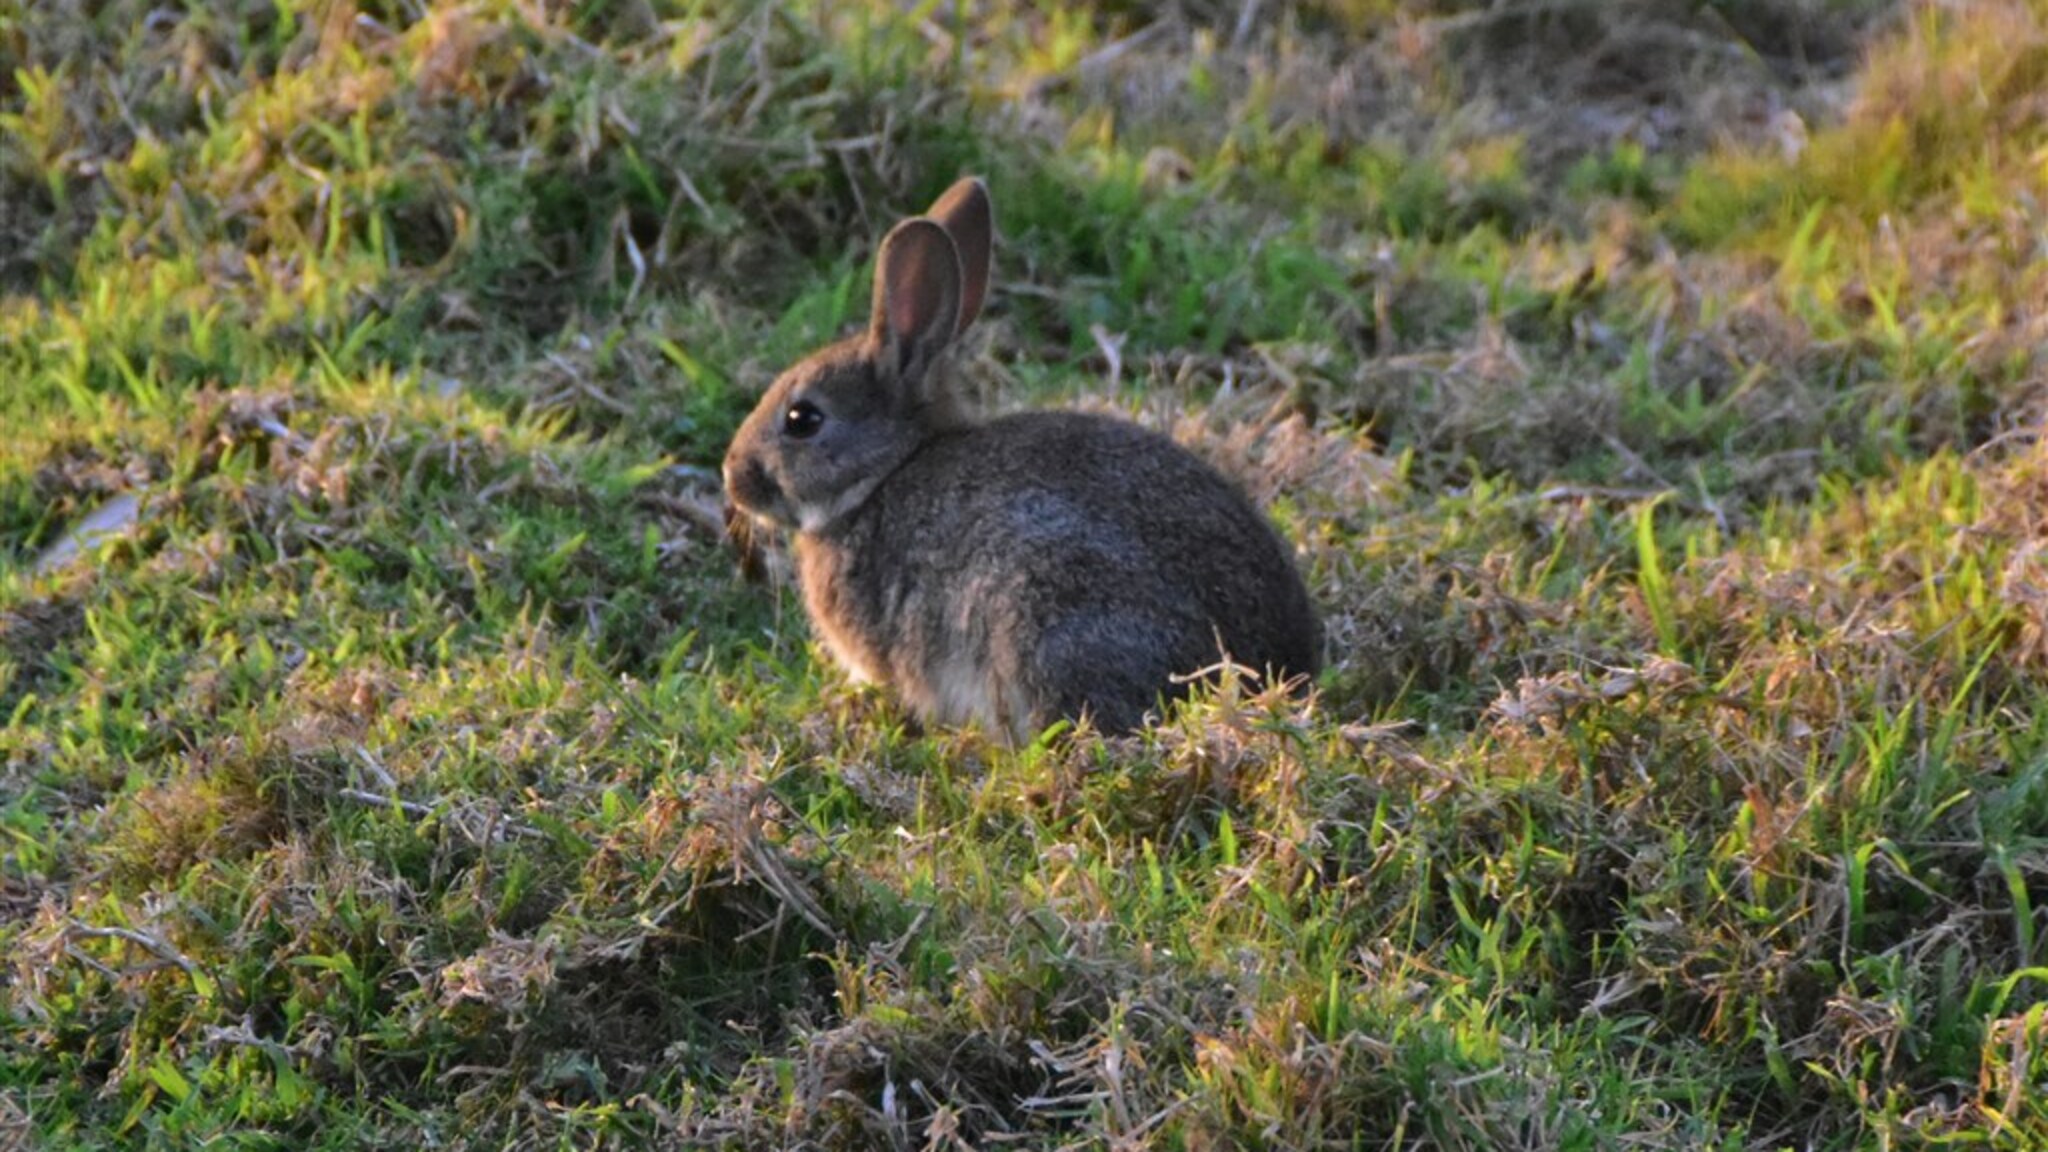 The Australian rabbit plague began in 1859 with only 24 animals